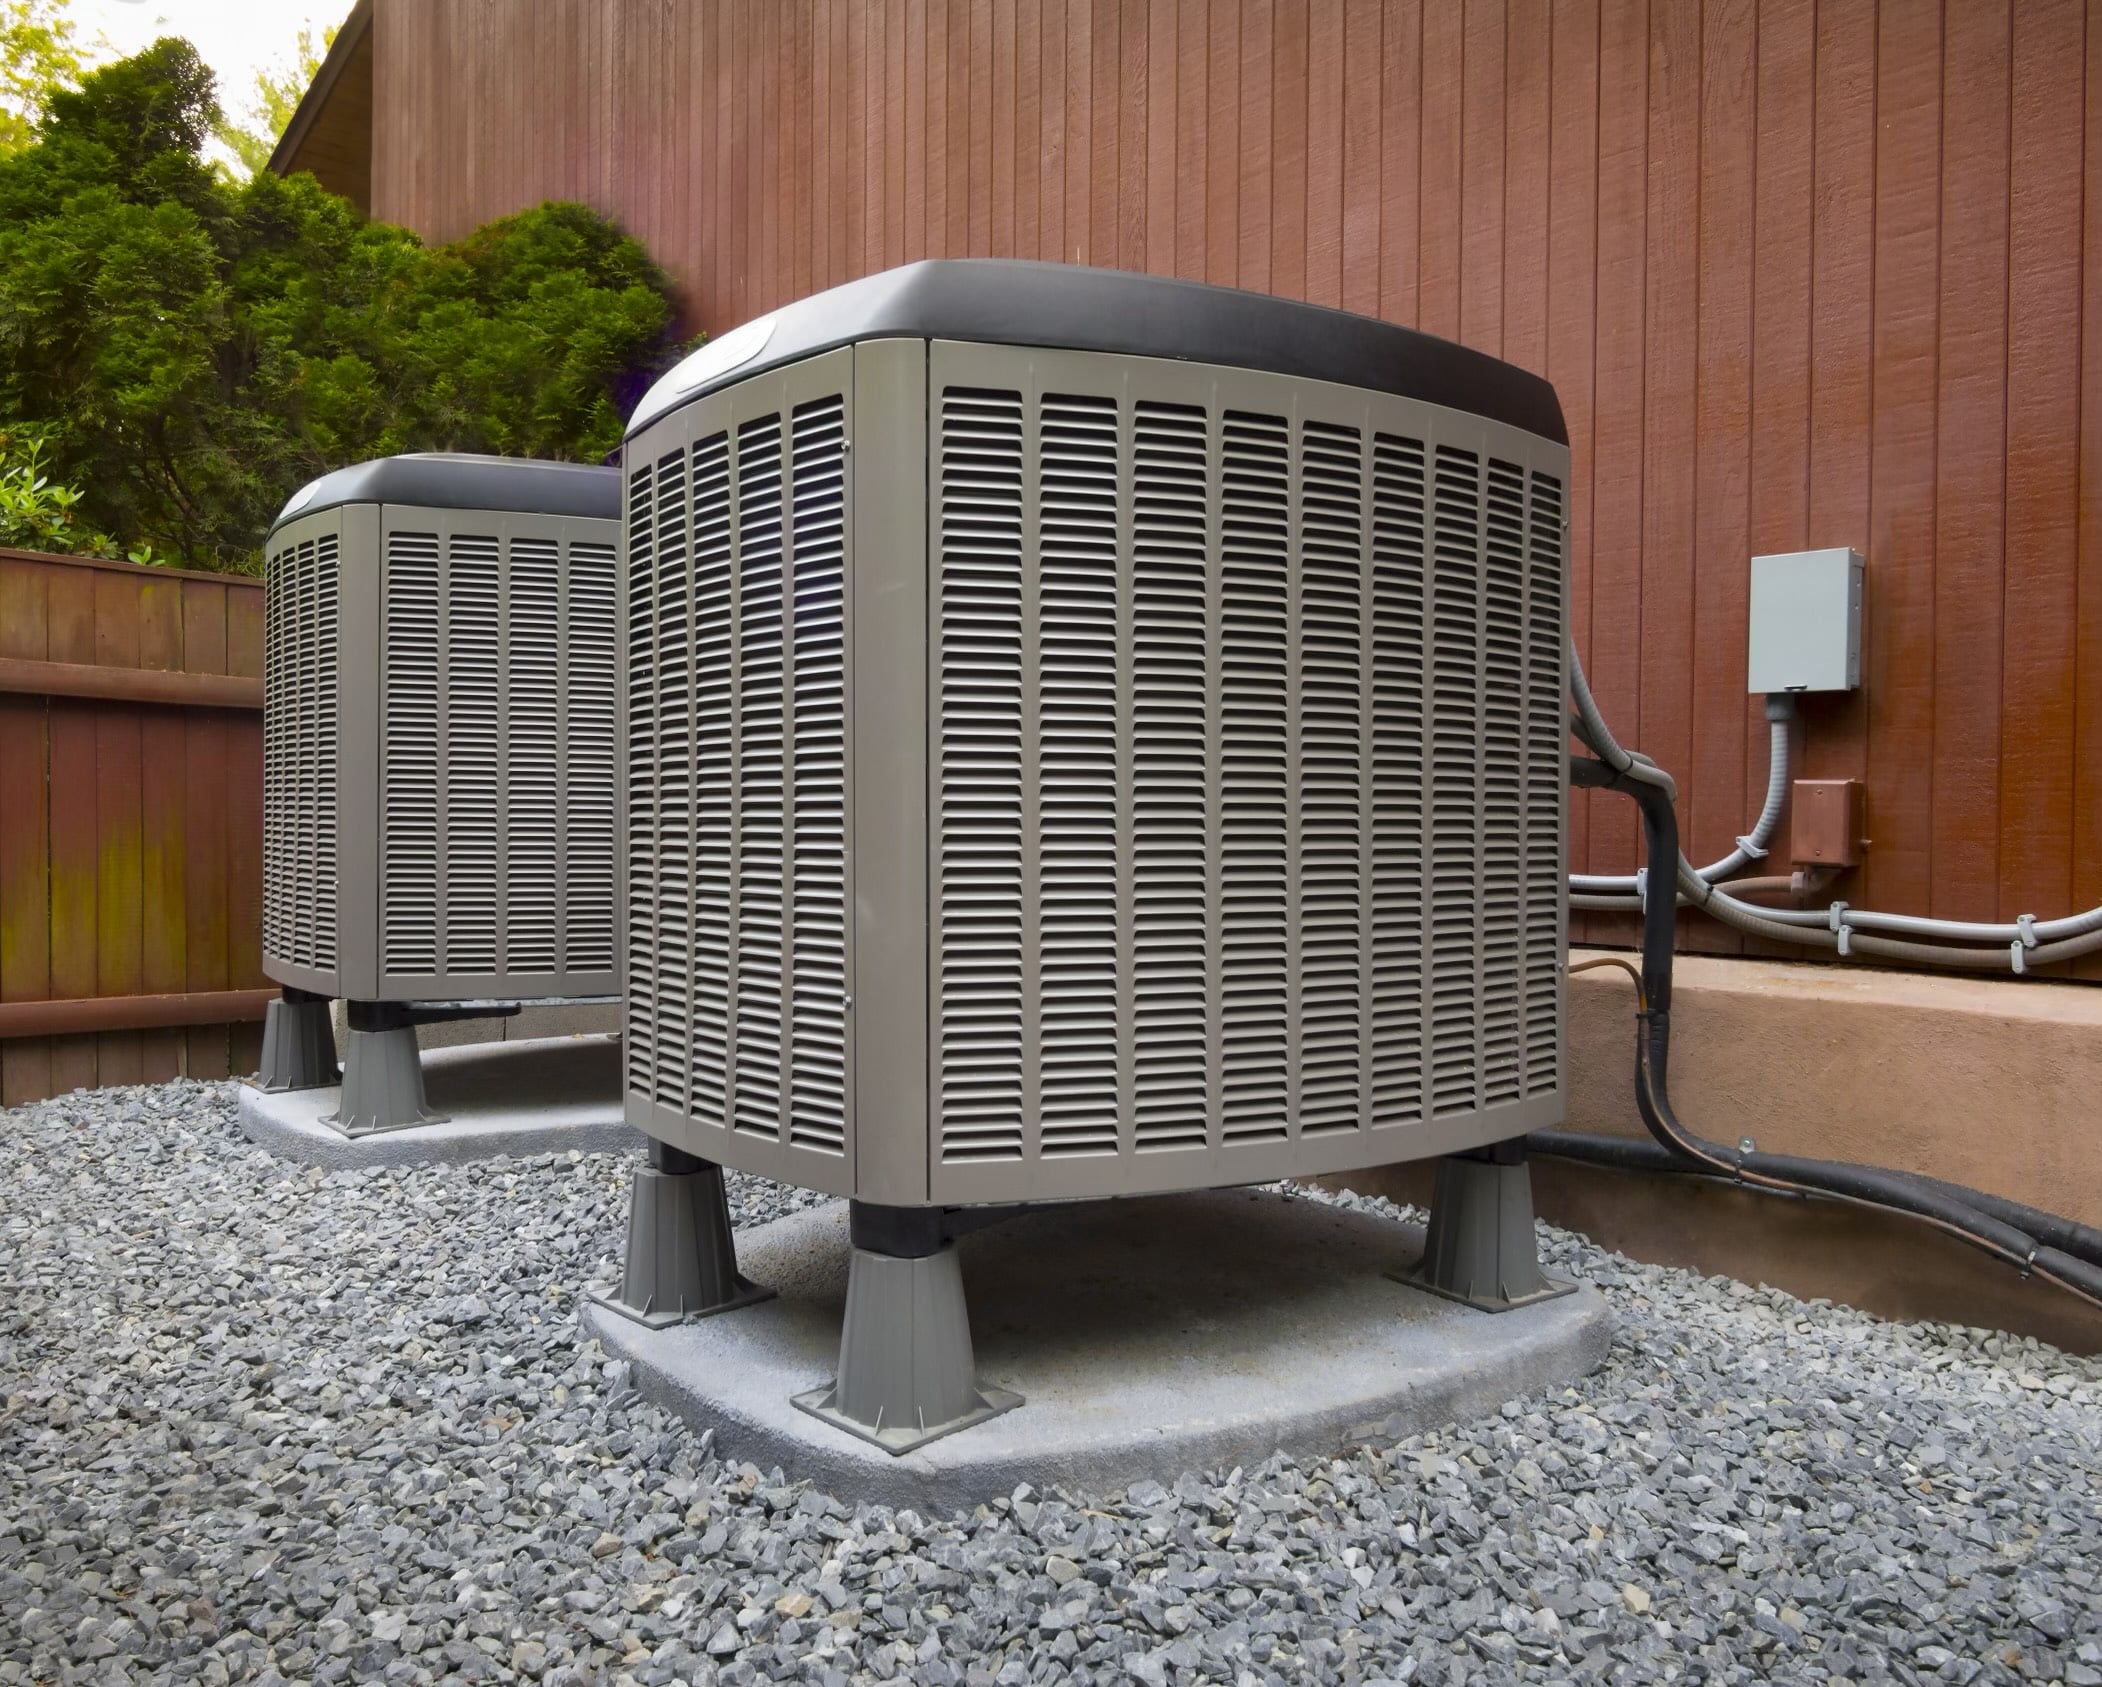 Upgrading to a High-Efficiency Air Conditioner: Saving Money and Energy